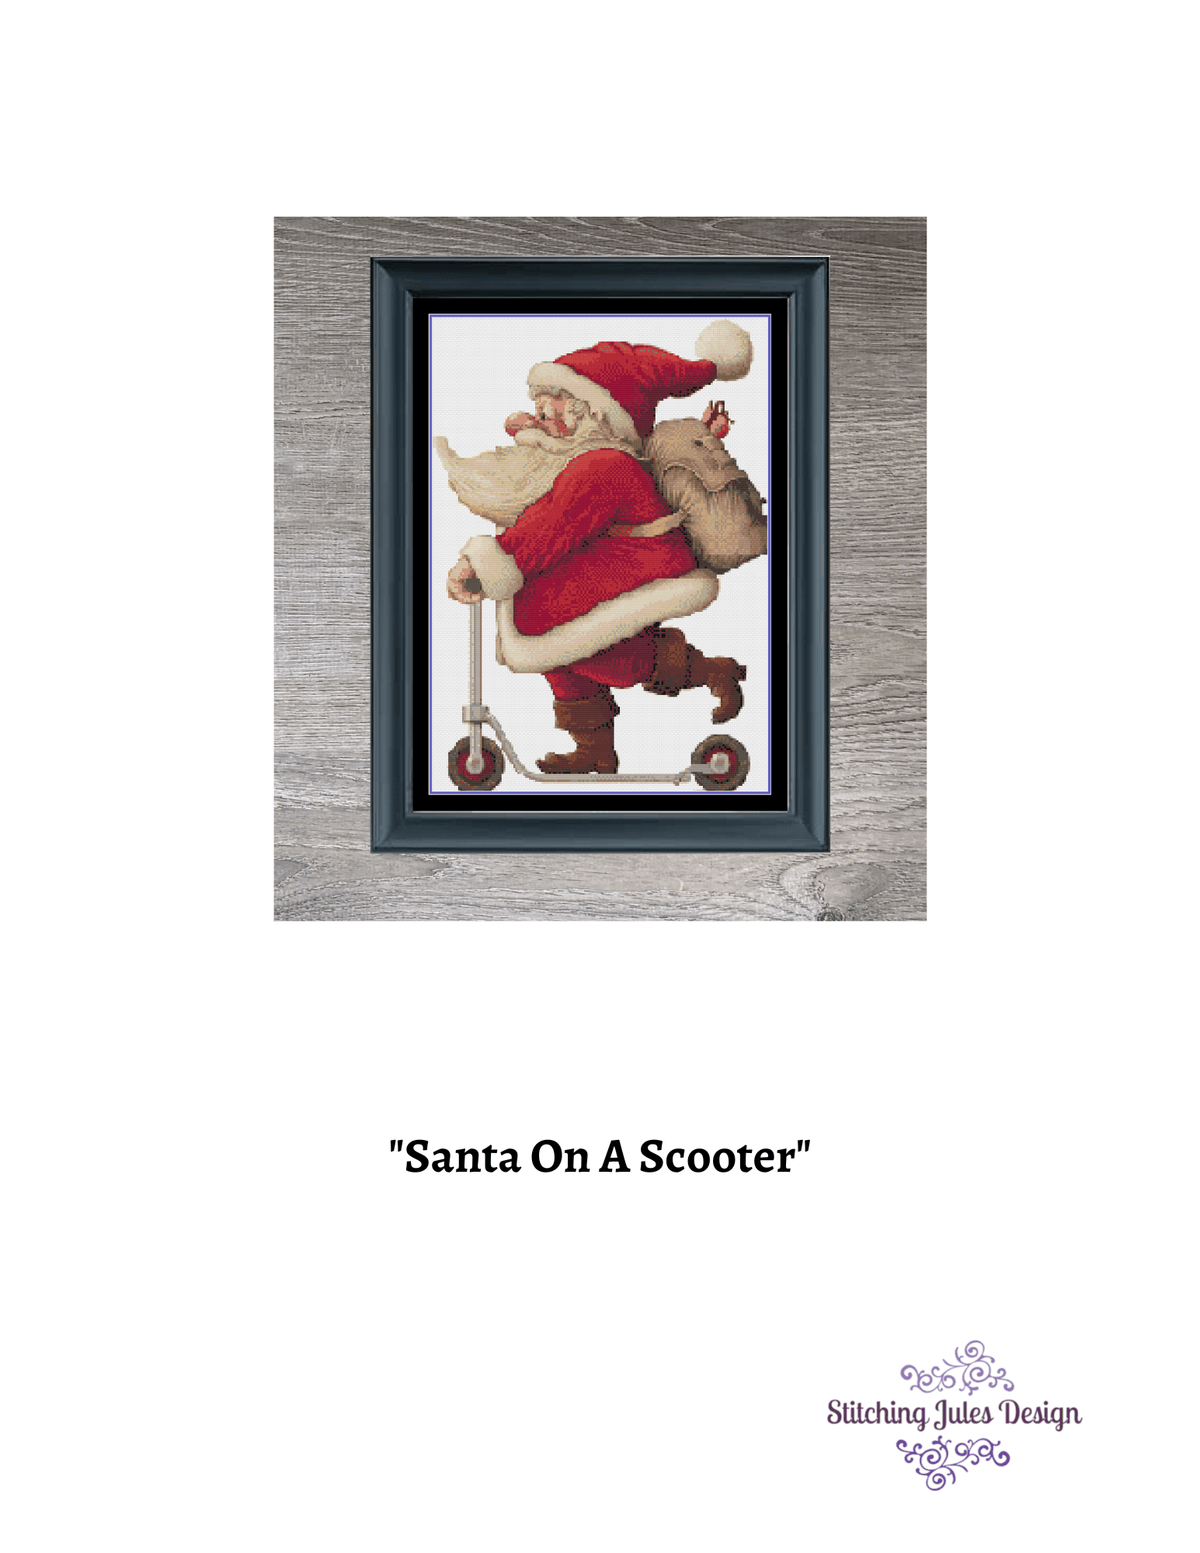 Stitching Jules Design Cross Stitch Pattern Santa Claus On Scooter Christmas Funny Cross Stitch Embroidery Needlepoint Pattern PDF Download - Ready For Pattern Keeper